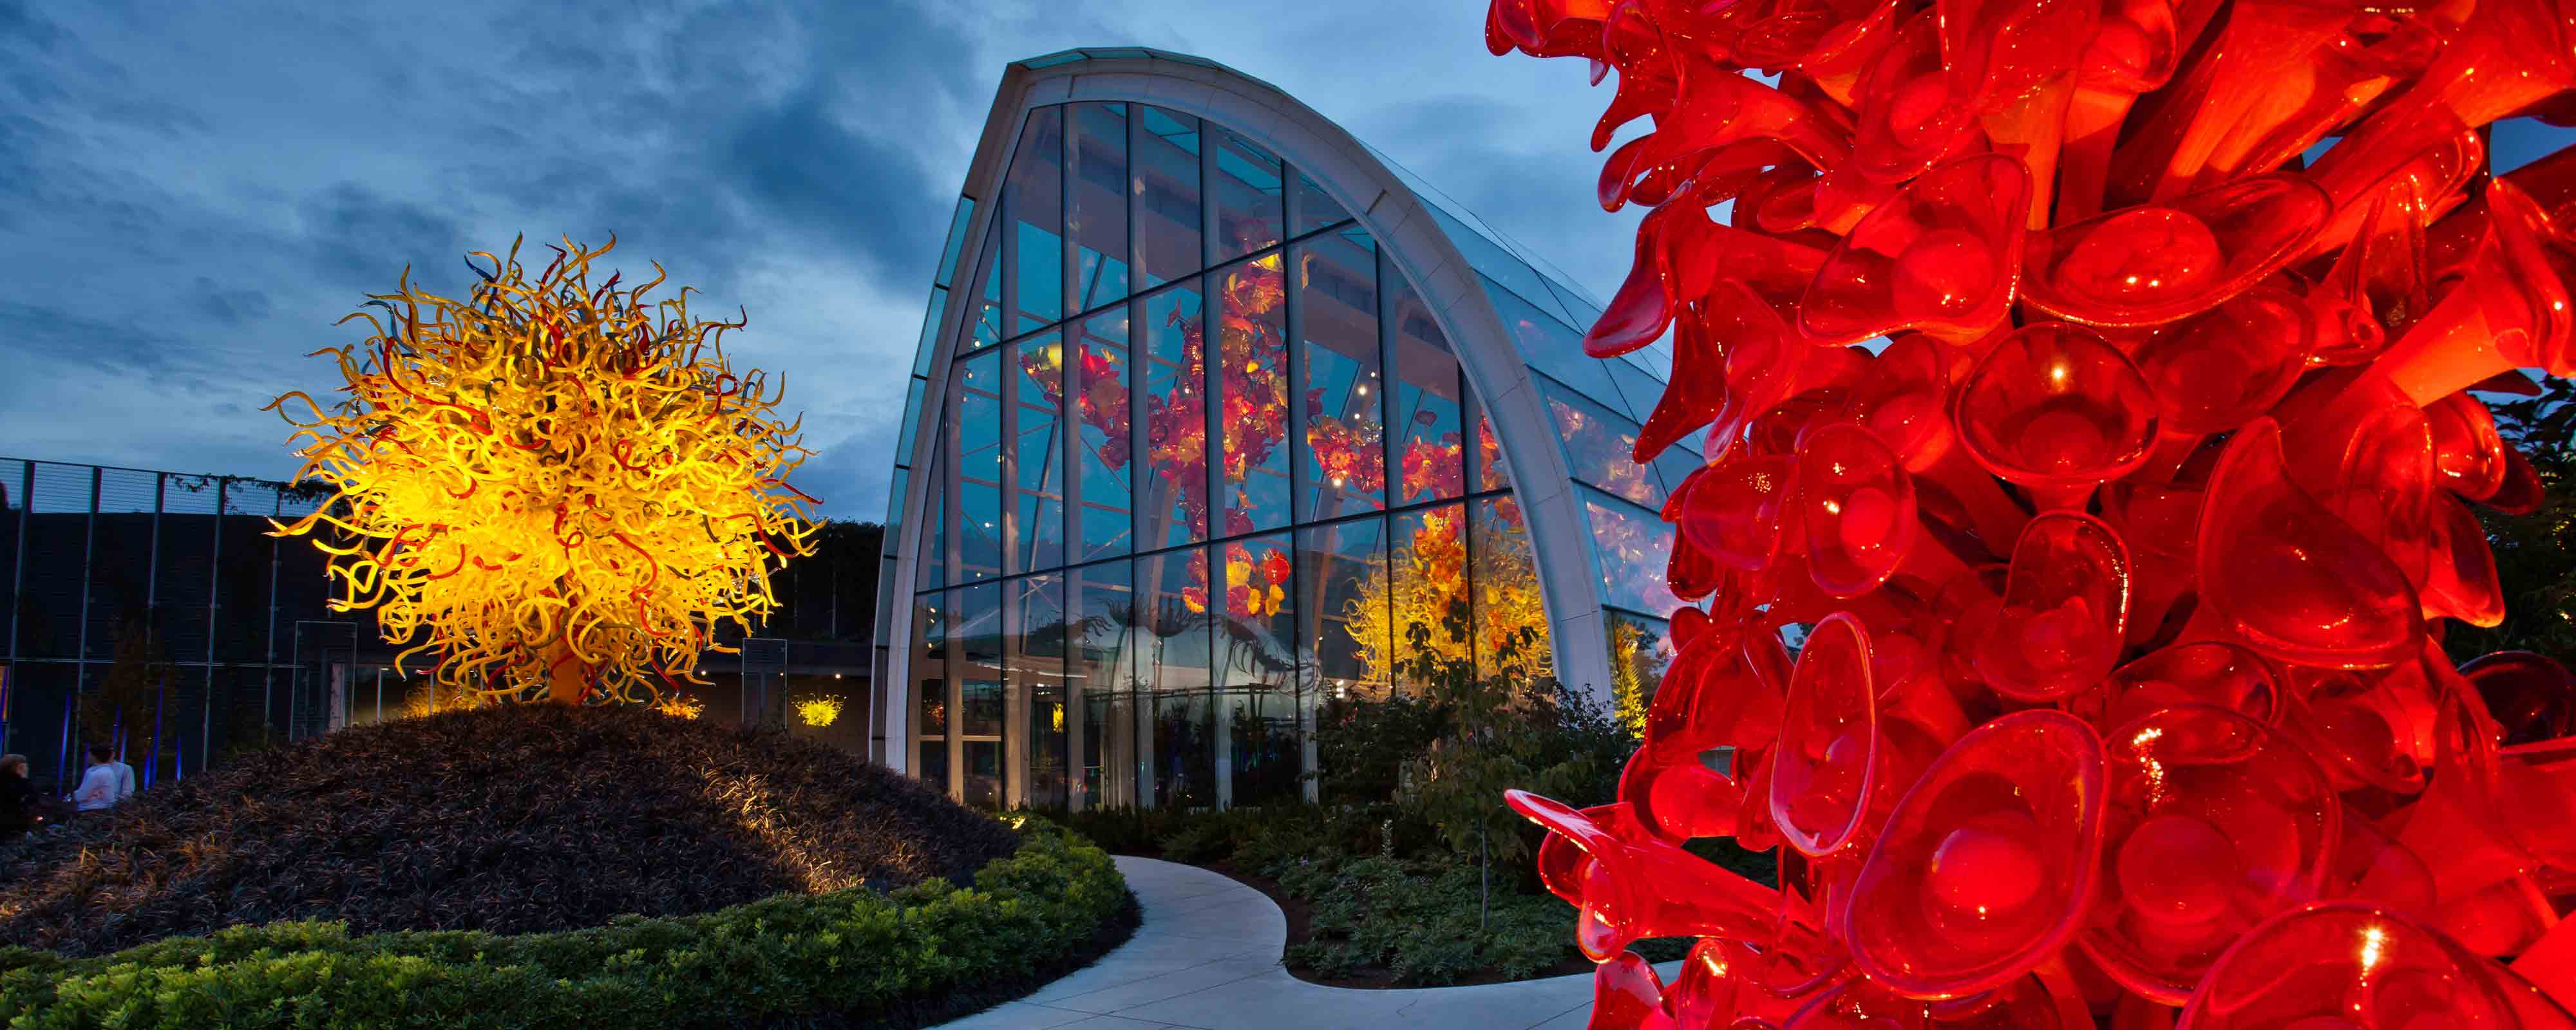 Chihuly Garden and Glass | Exhibition